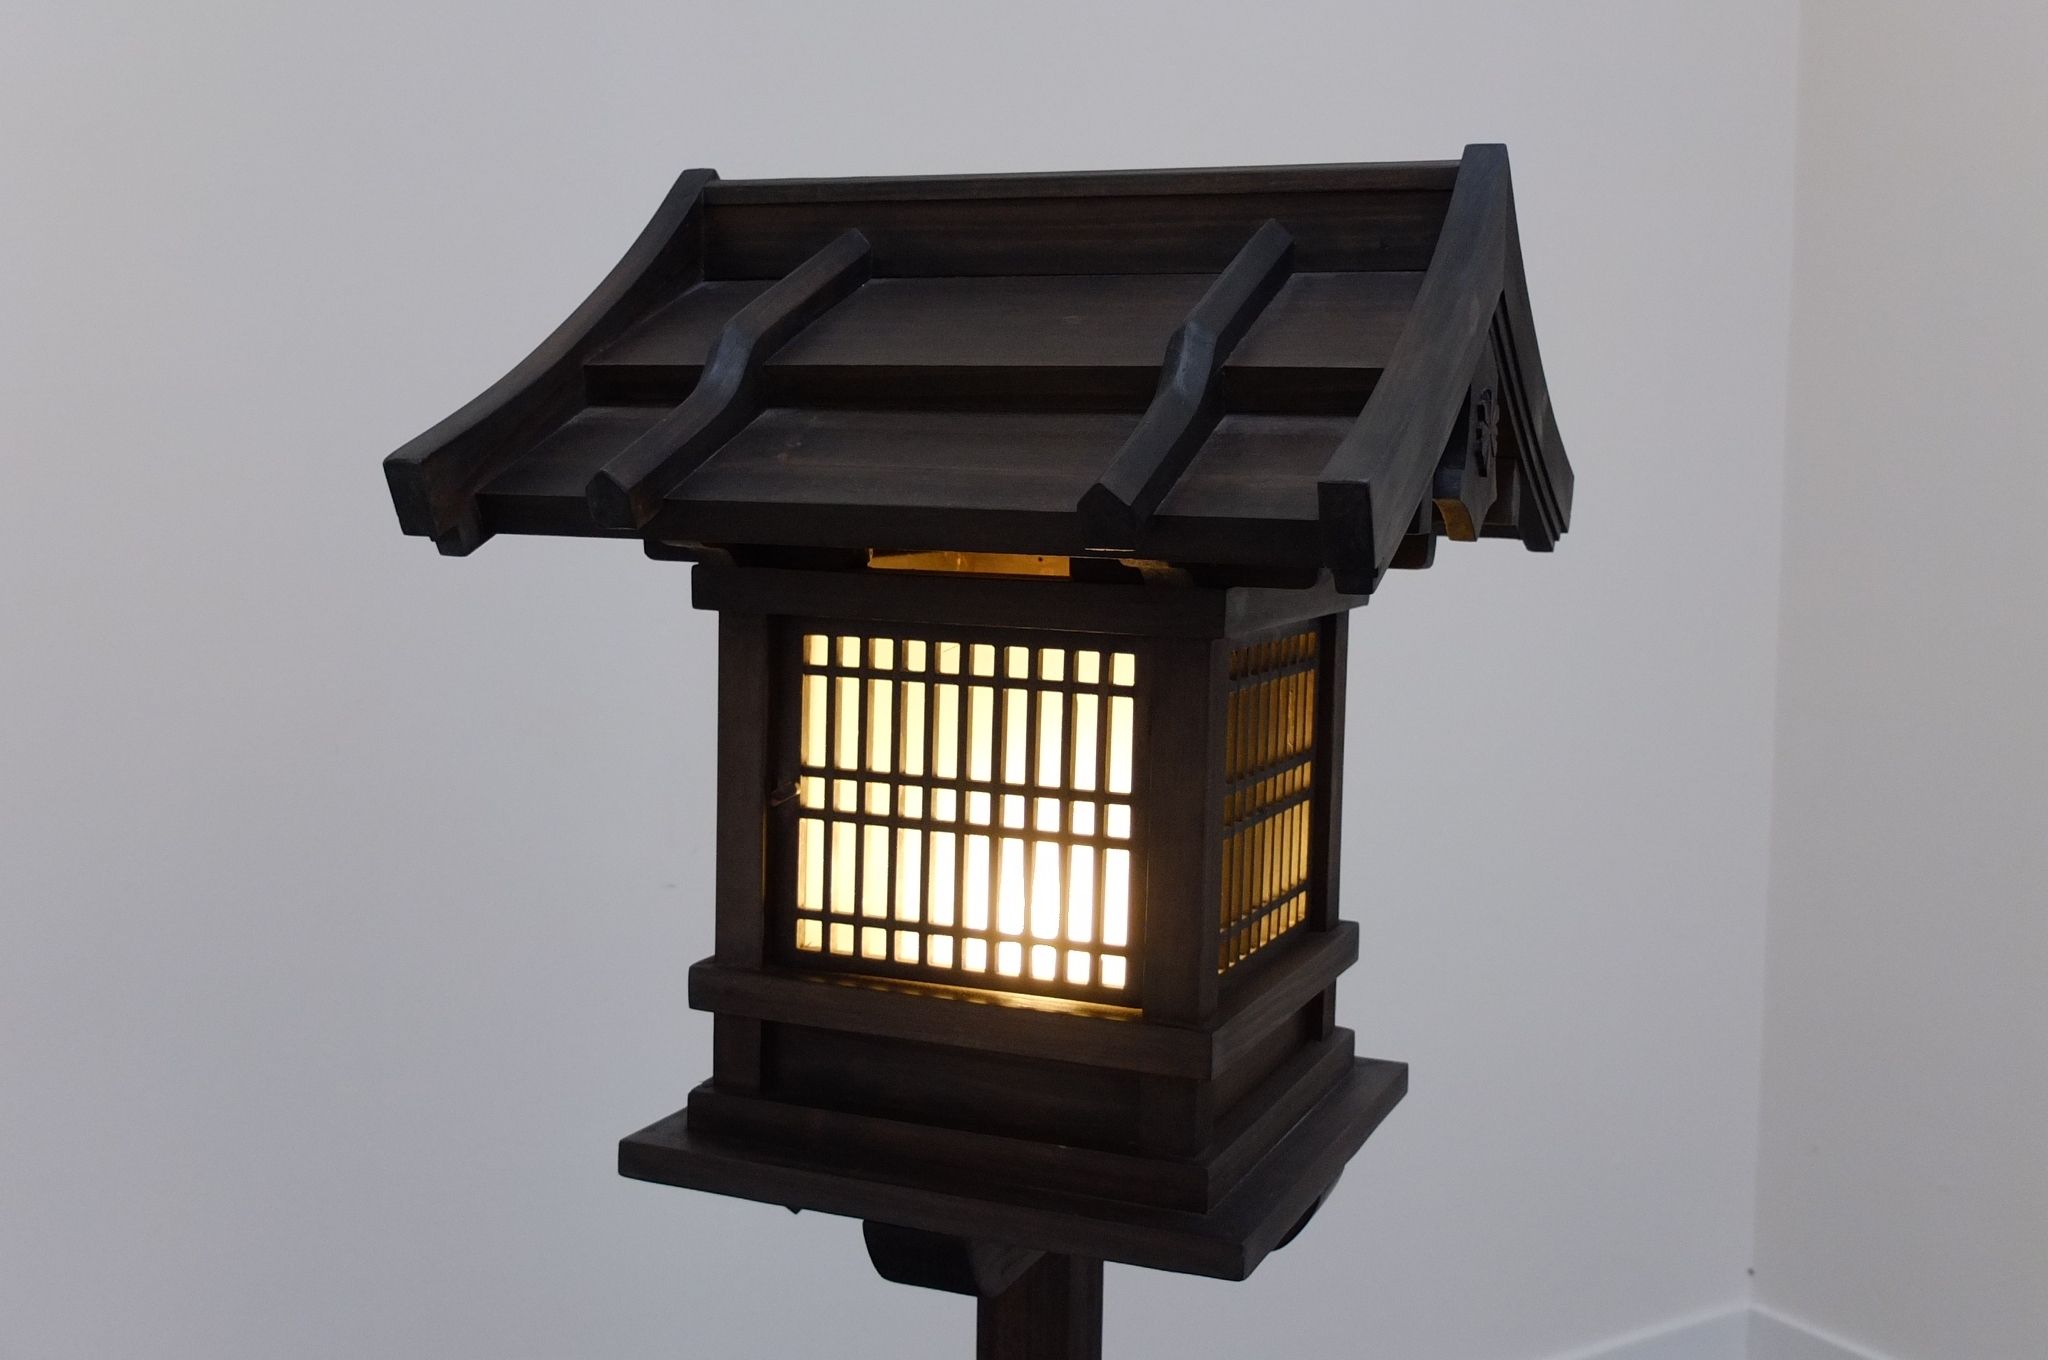 Japanese Wooden Lantern, Outdoor (wl2) – Eastern Classics Intended For Outdoor Japanese Lanterns (View 3 of 20)